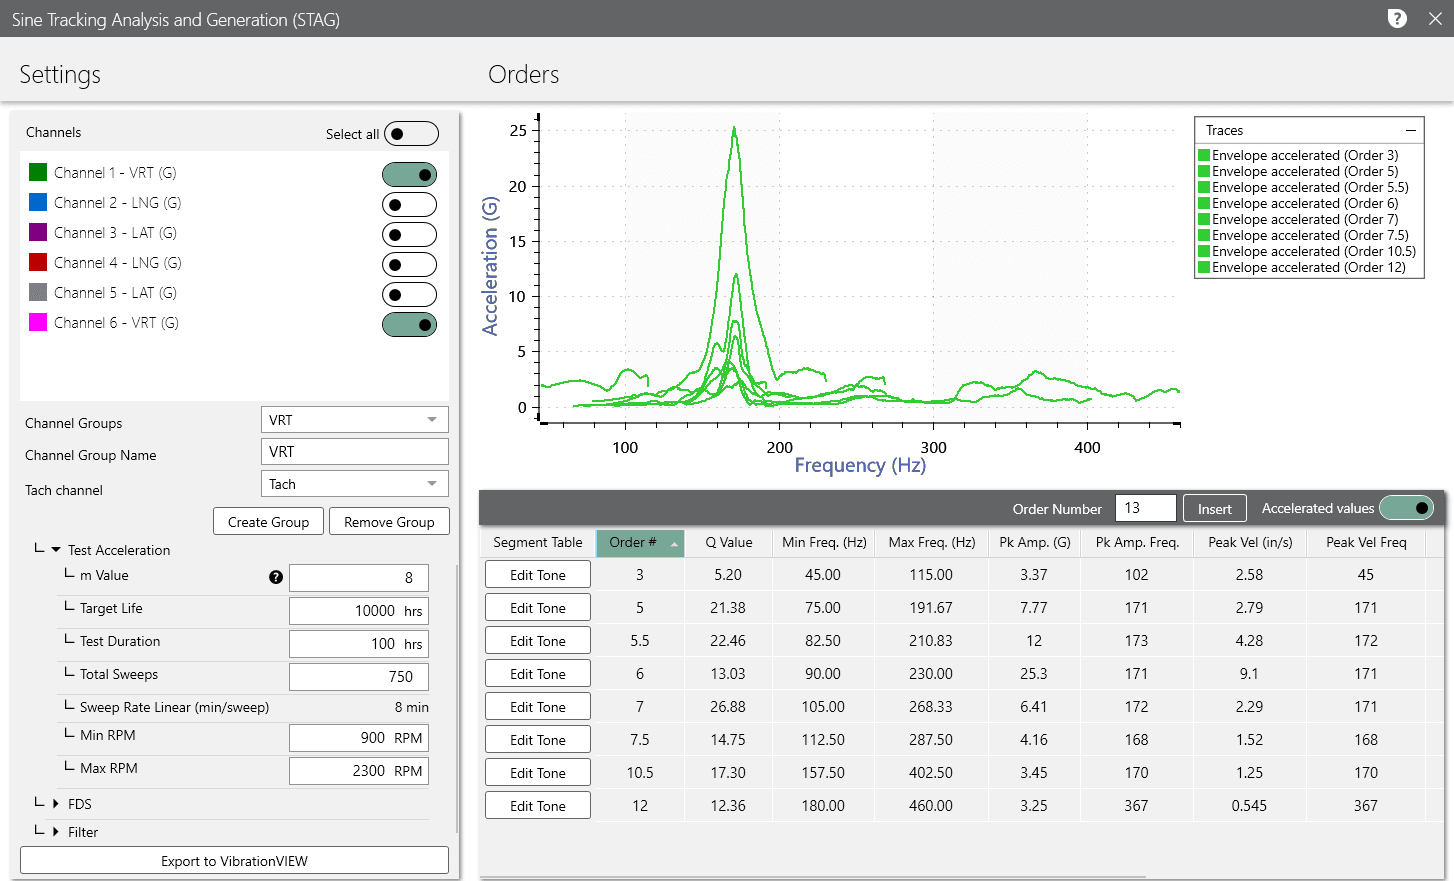 The ObserVIEW Sine Tracking Analysis and Generation (STAG) dialog, including an order list and settings for export.